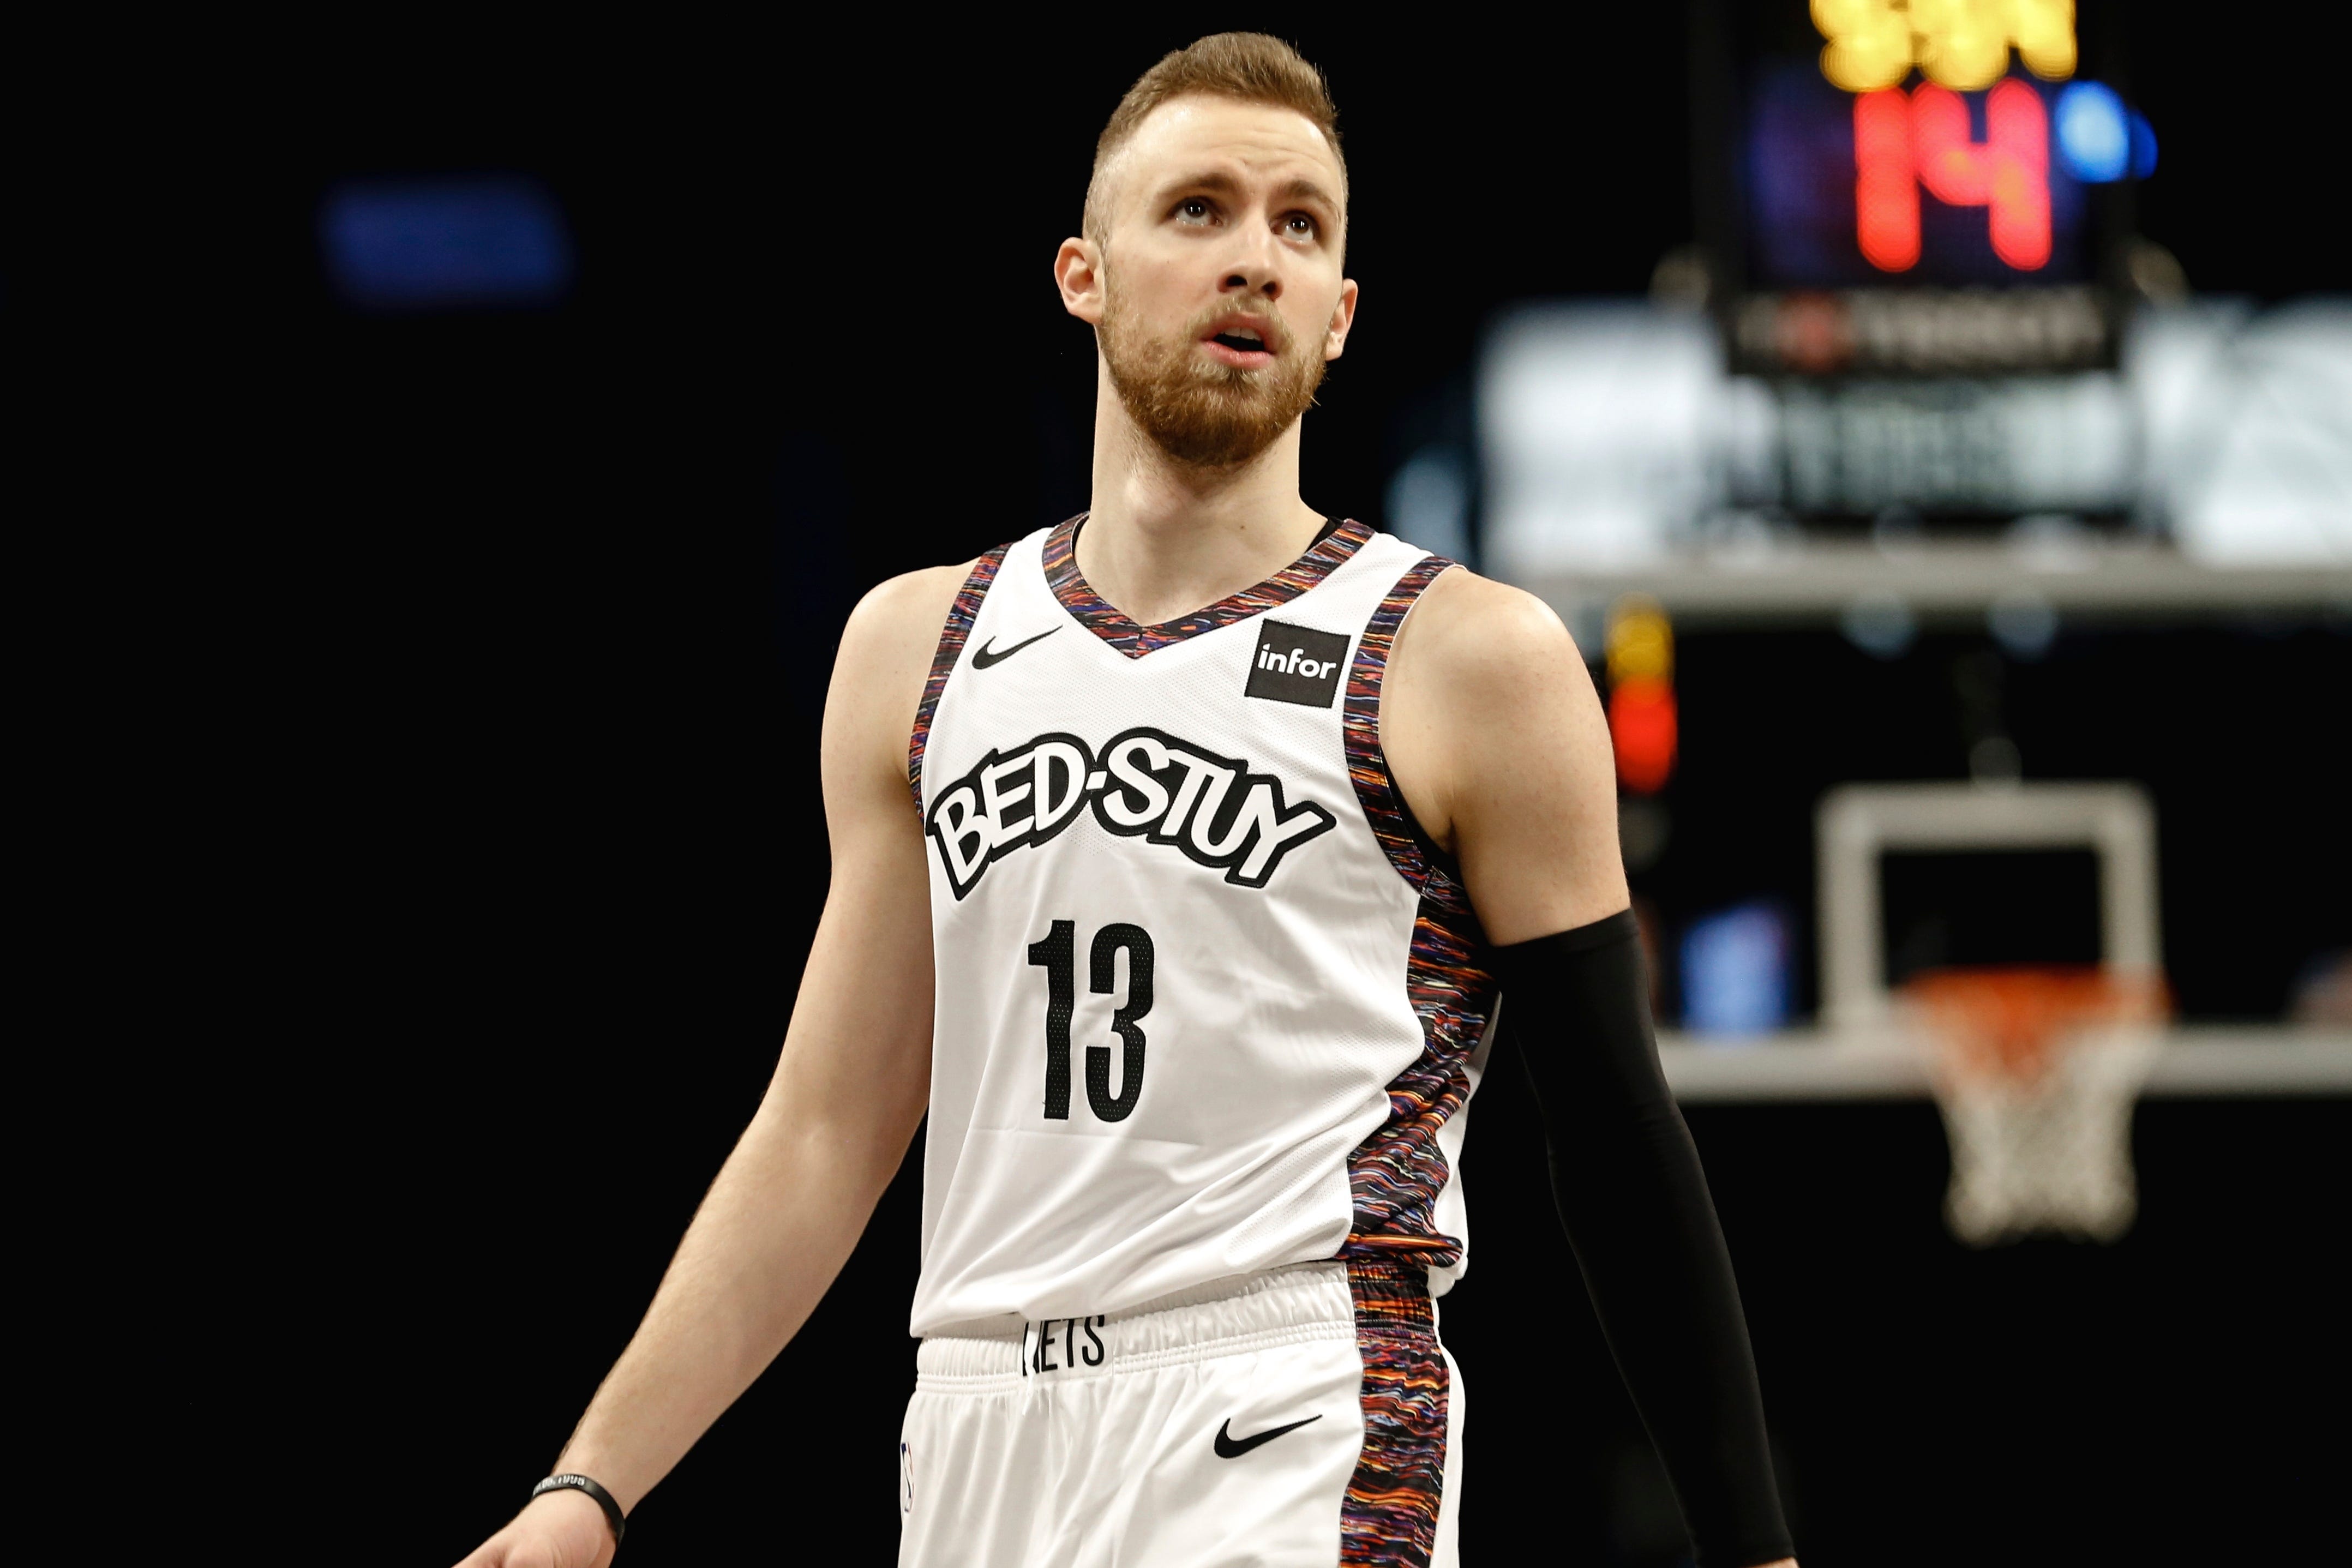 Dzanan Musa, who came from the Brooklyn Nets to the Pistons, during the first half of an NBA basketball game on Sunday, Dec. 8, 2019, in New York.